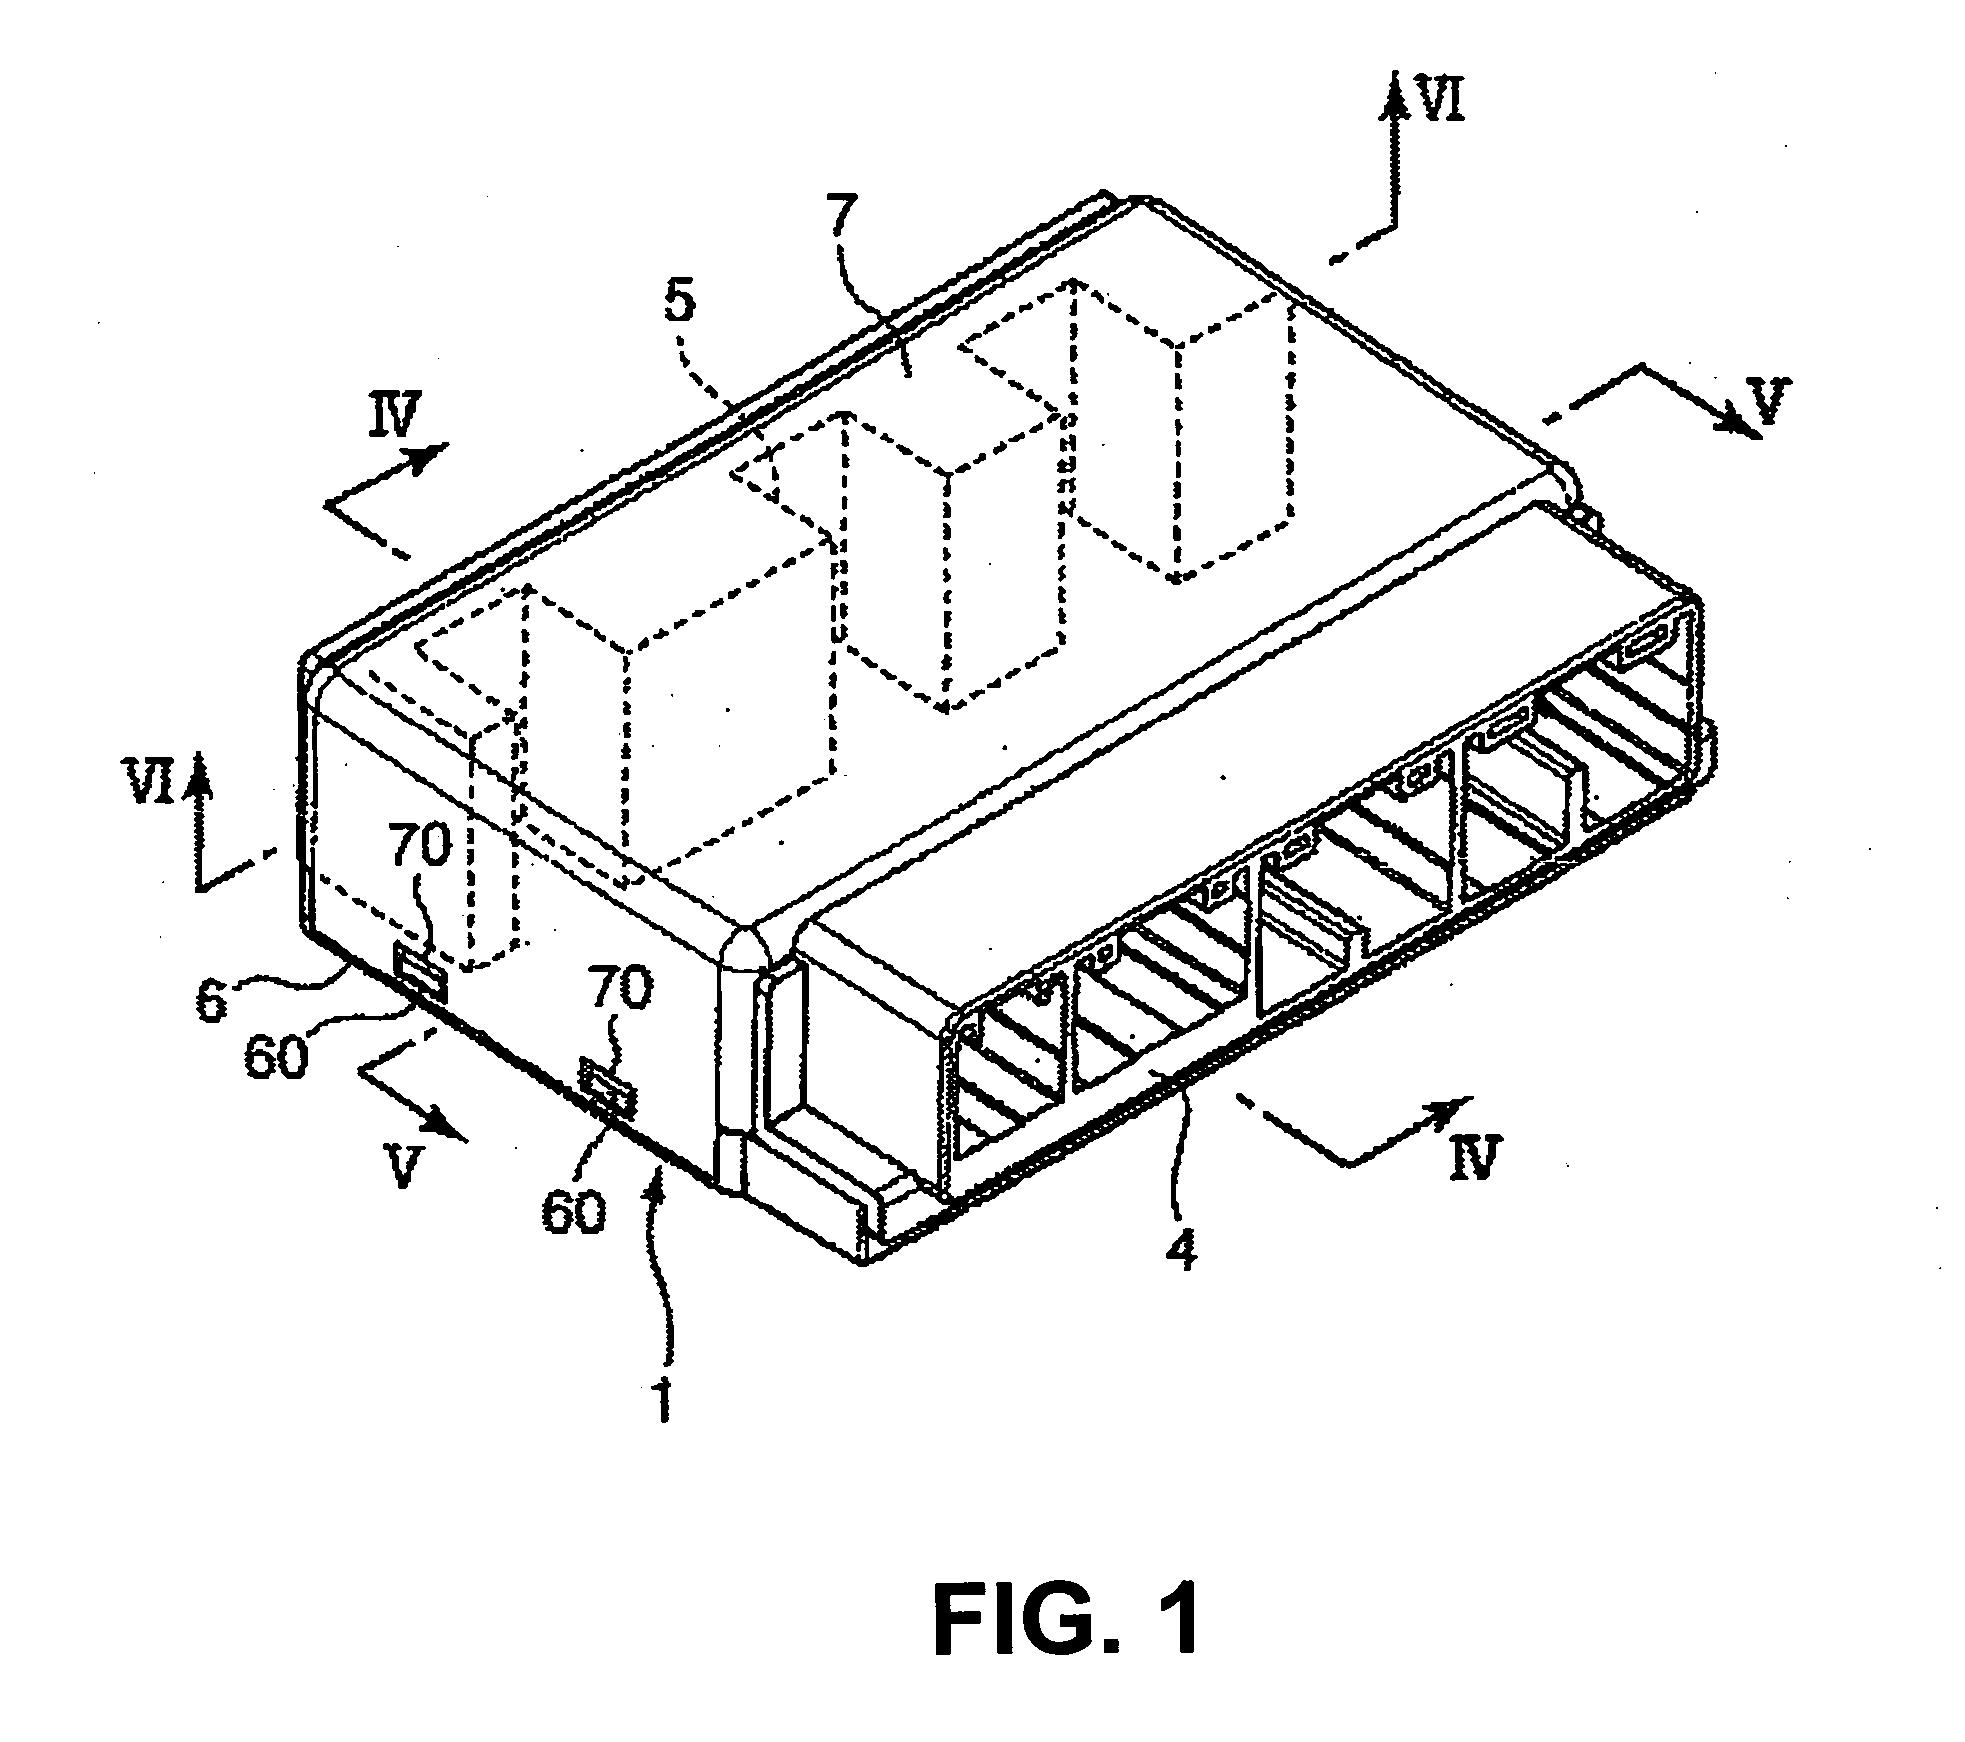 Circuit assembly, producing method of the same, distribution unit and bus bar substrate